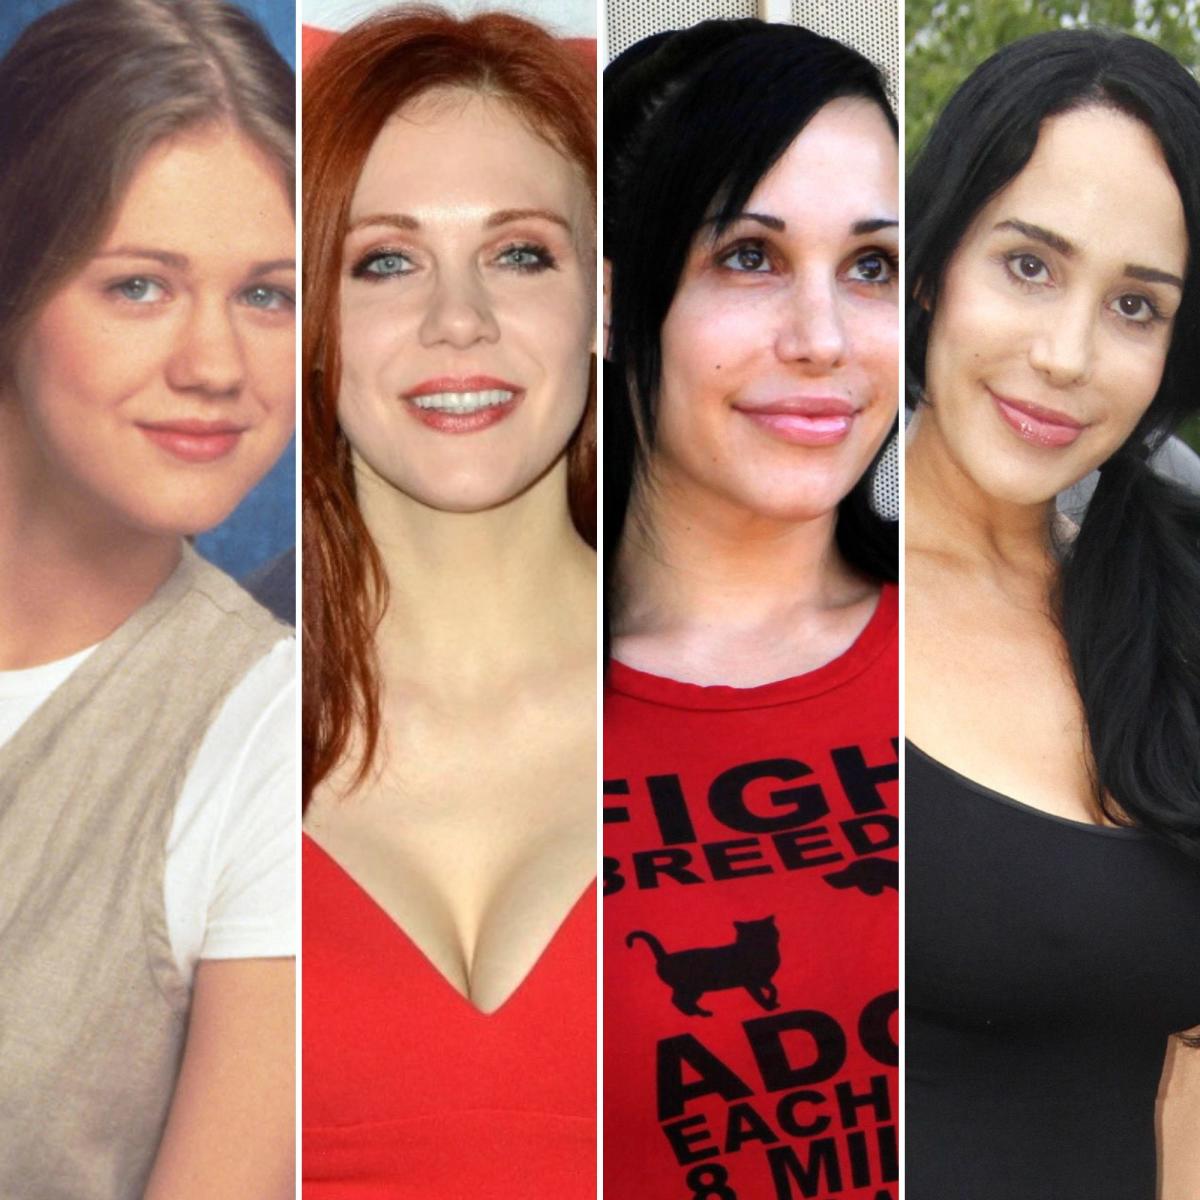 Soap Opera Star Turned Porn Star - Maitland Ward, Octomom and More Celebs You Didn't Know Became Porn Stars